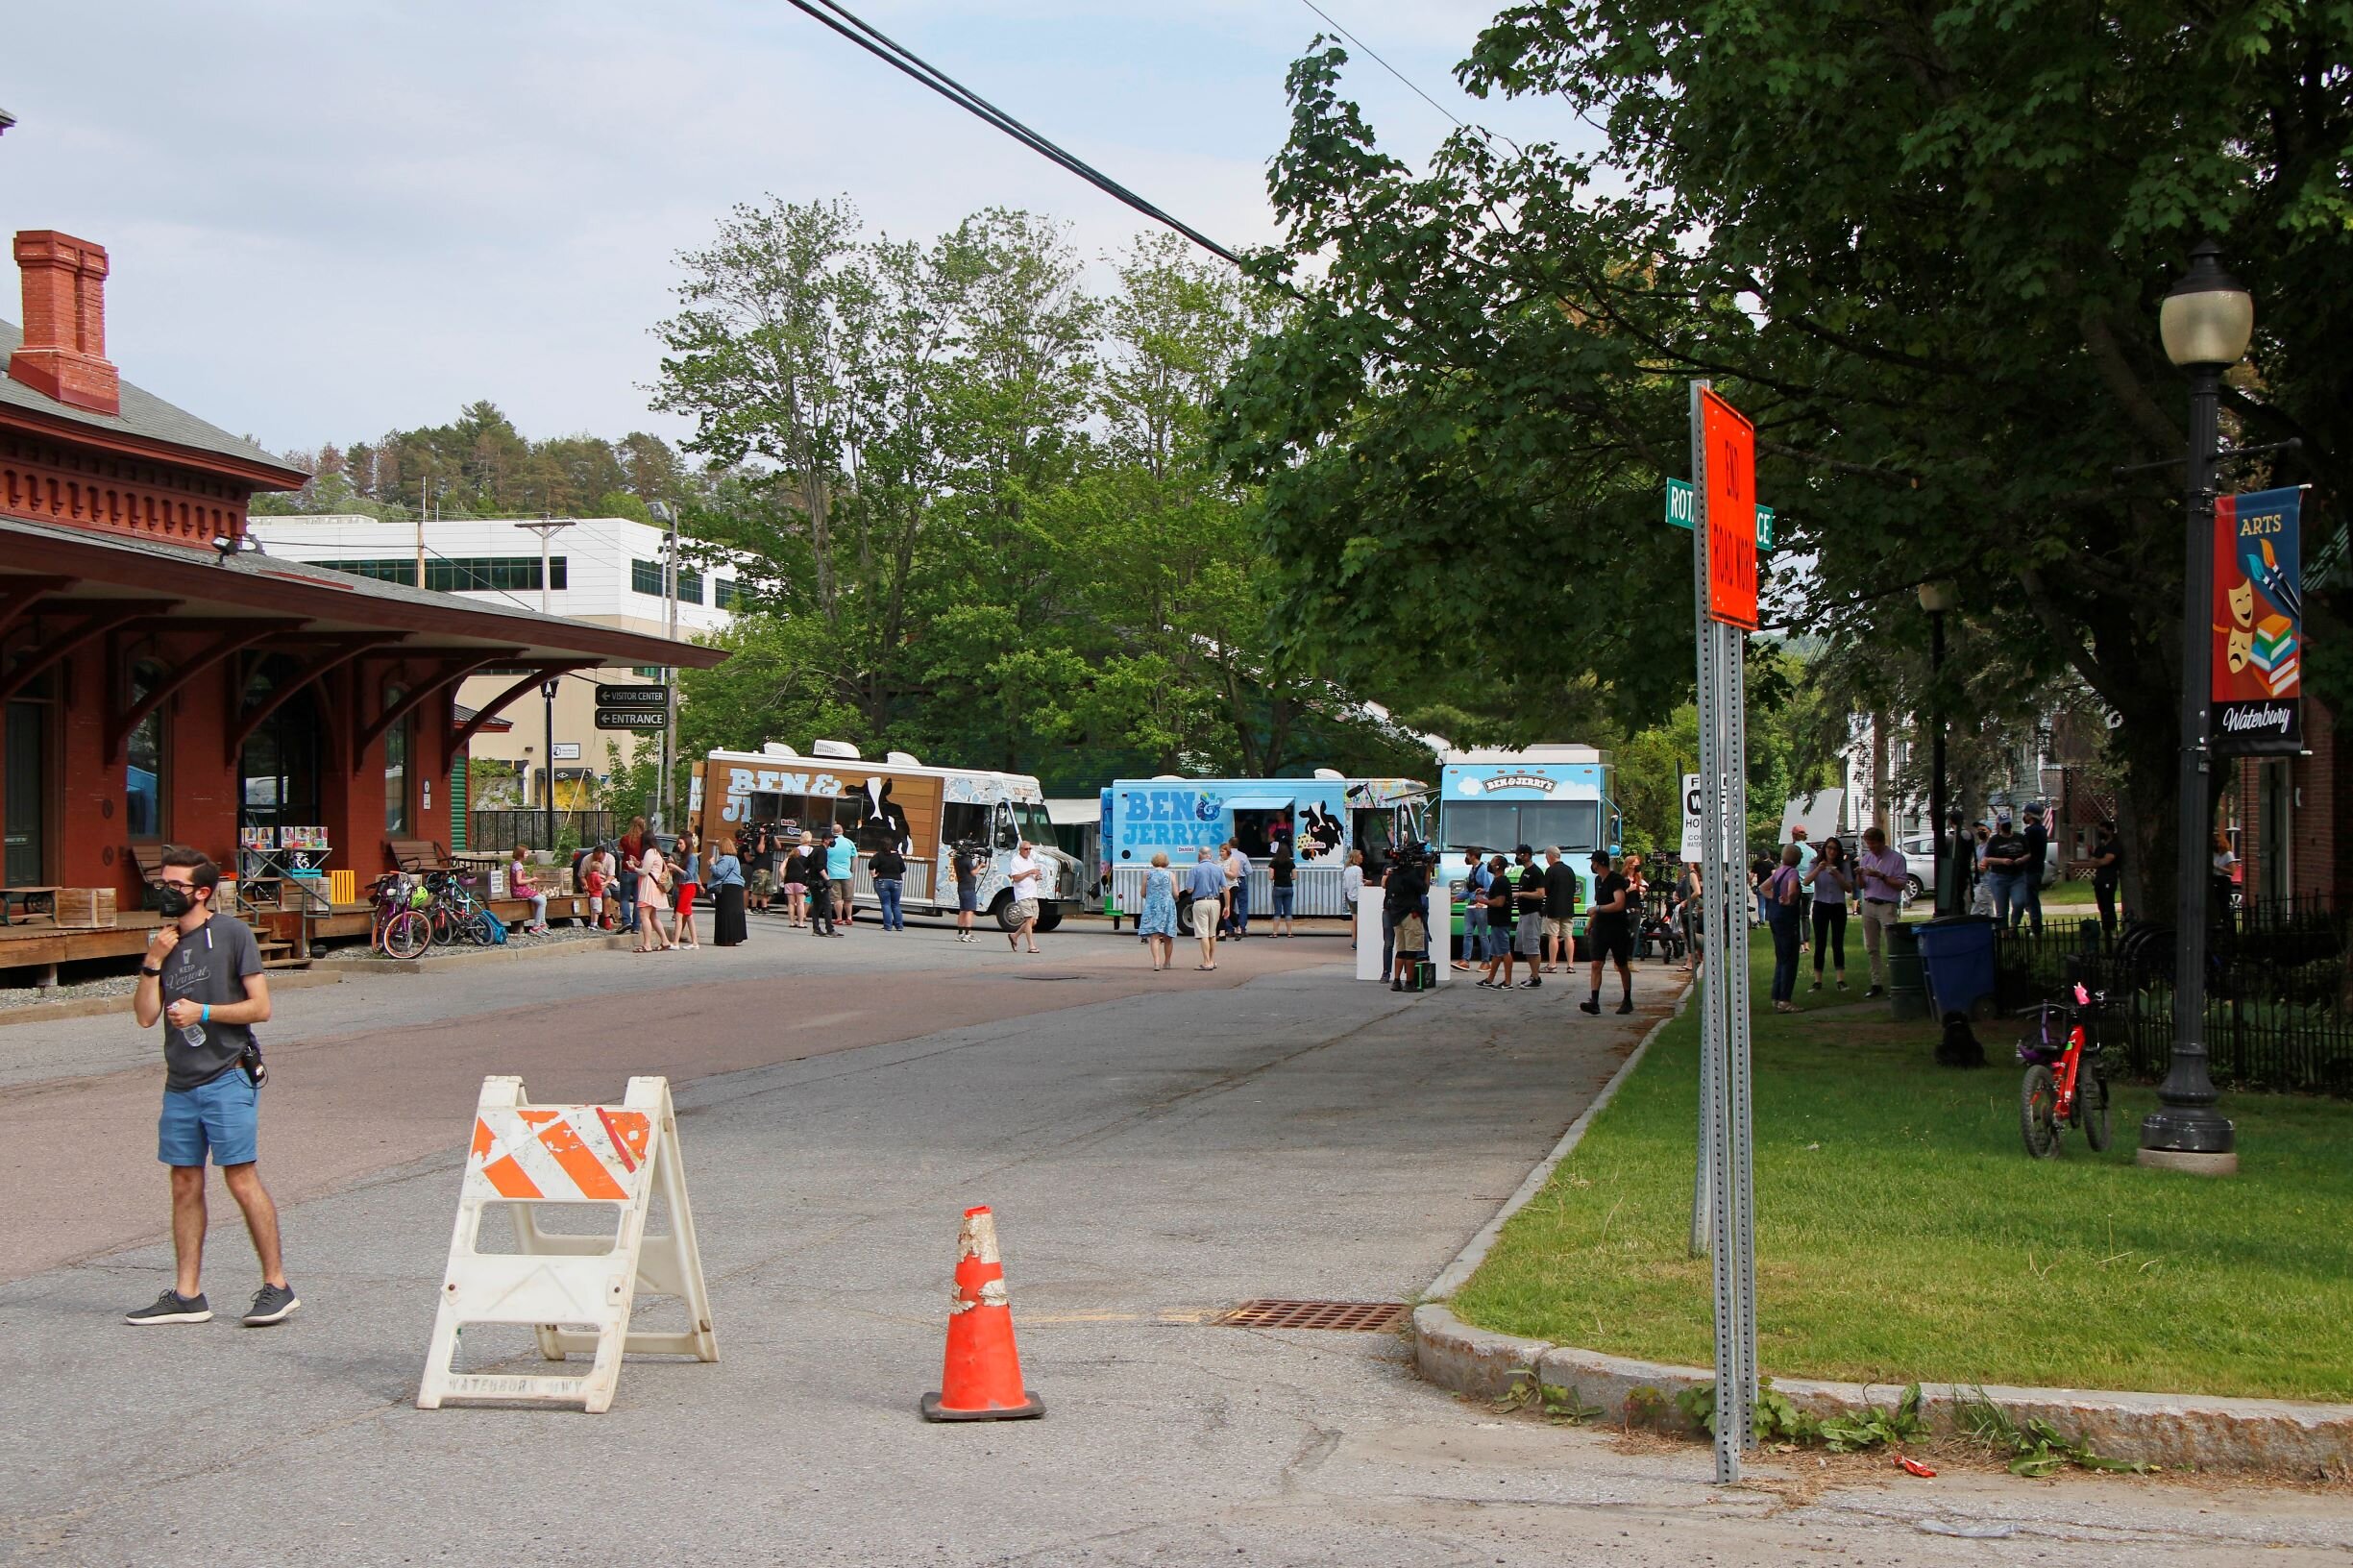   Rotarian Way – the street between the train station and Rusty Parker Park – was shut down for two days for the Food Network shoot. Photo by Gordon Miller.  